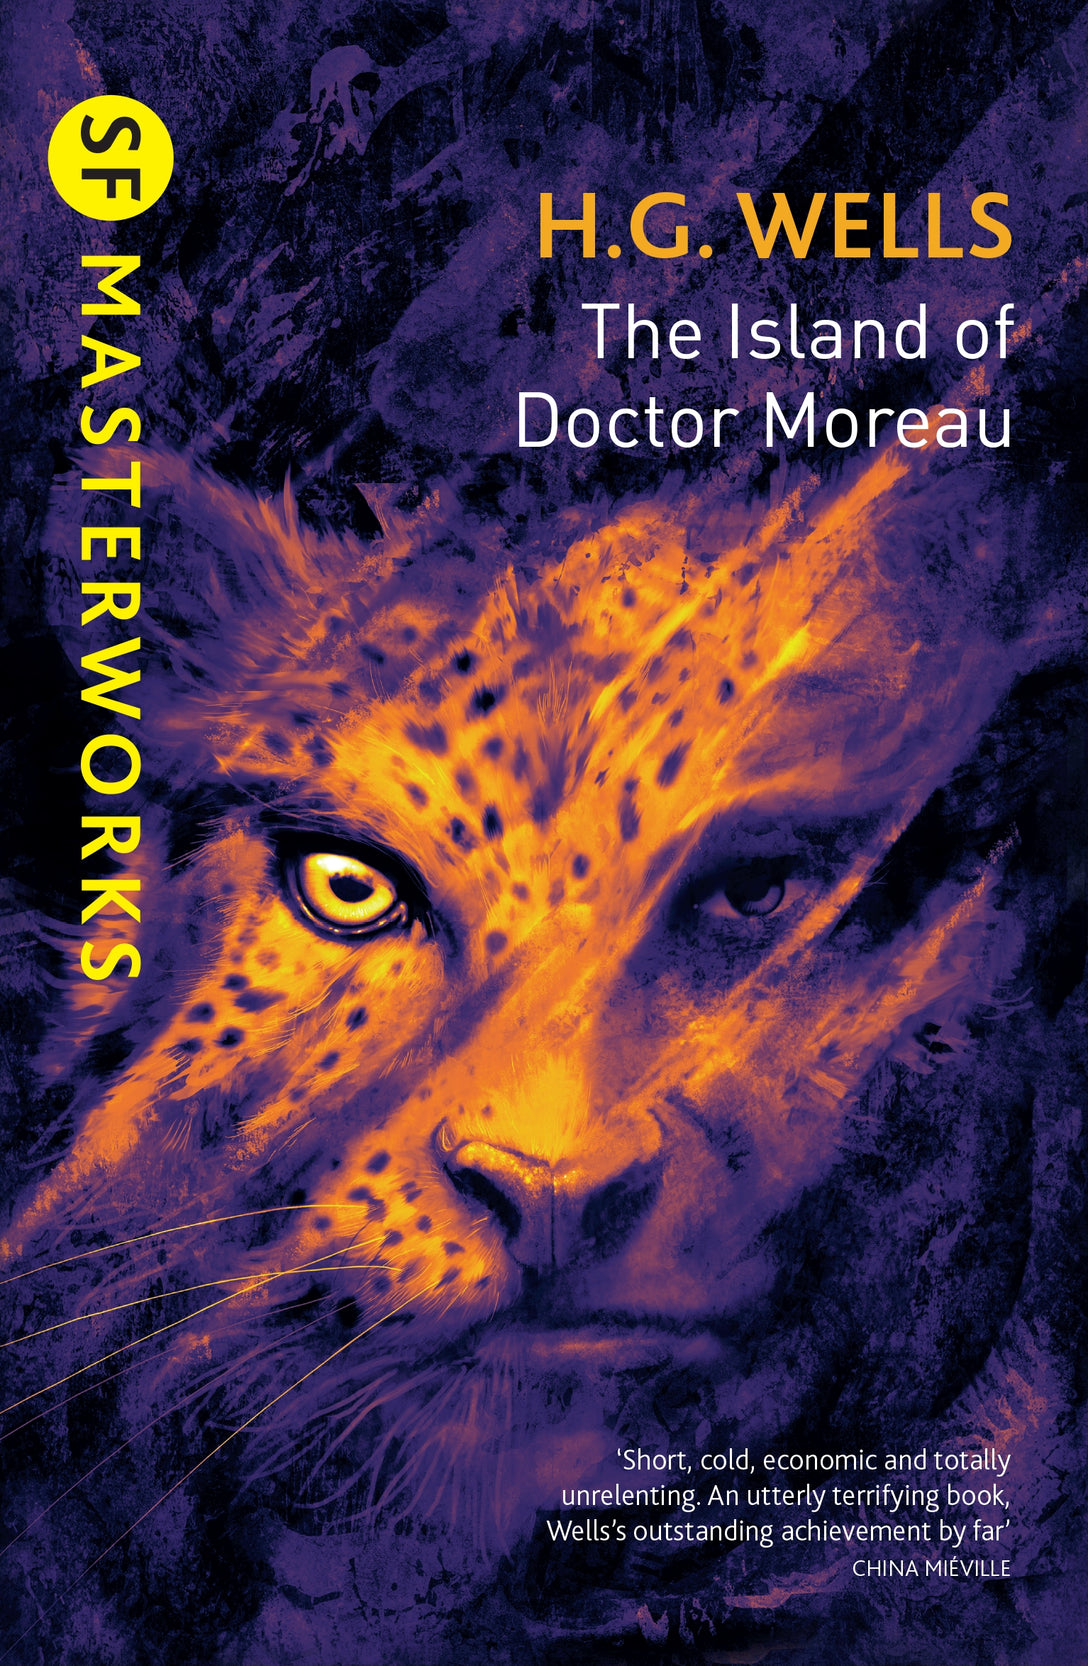 The Island Of Doctor Moreau by H.G. Wells